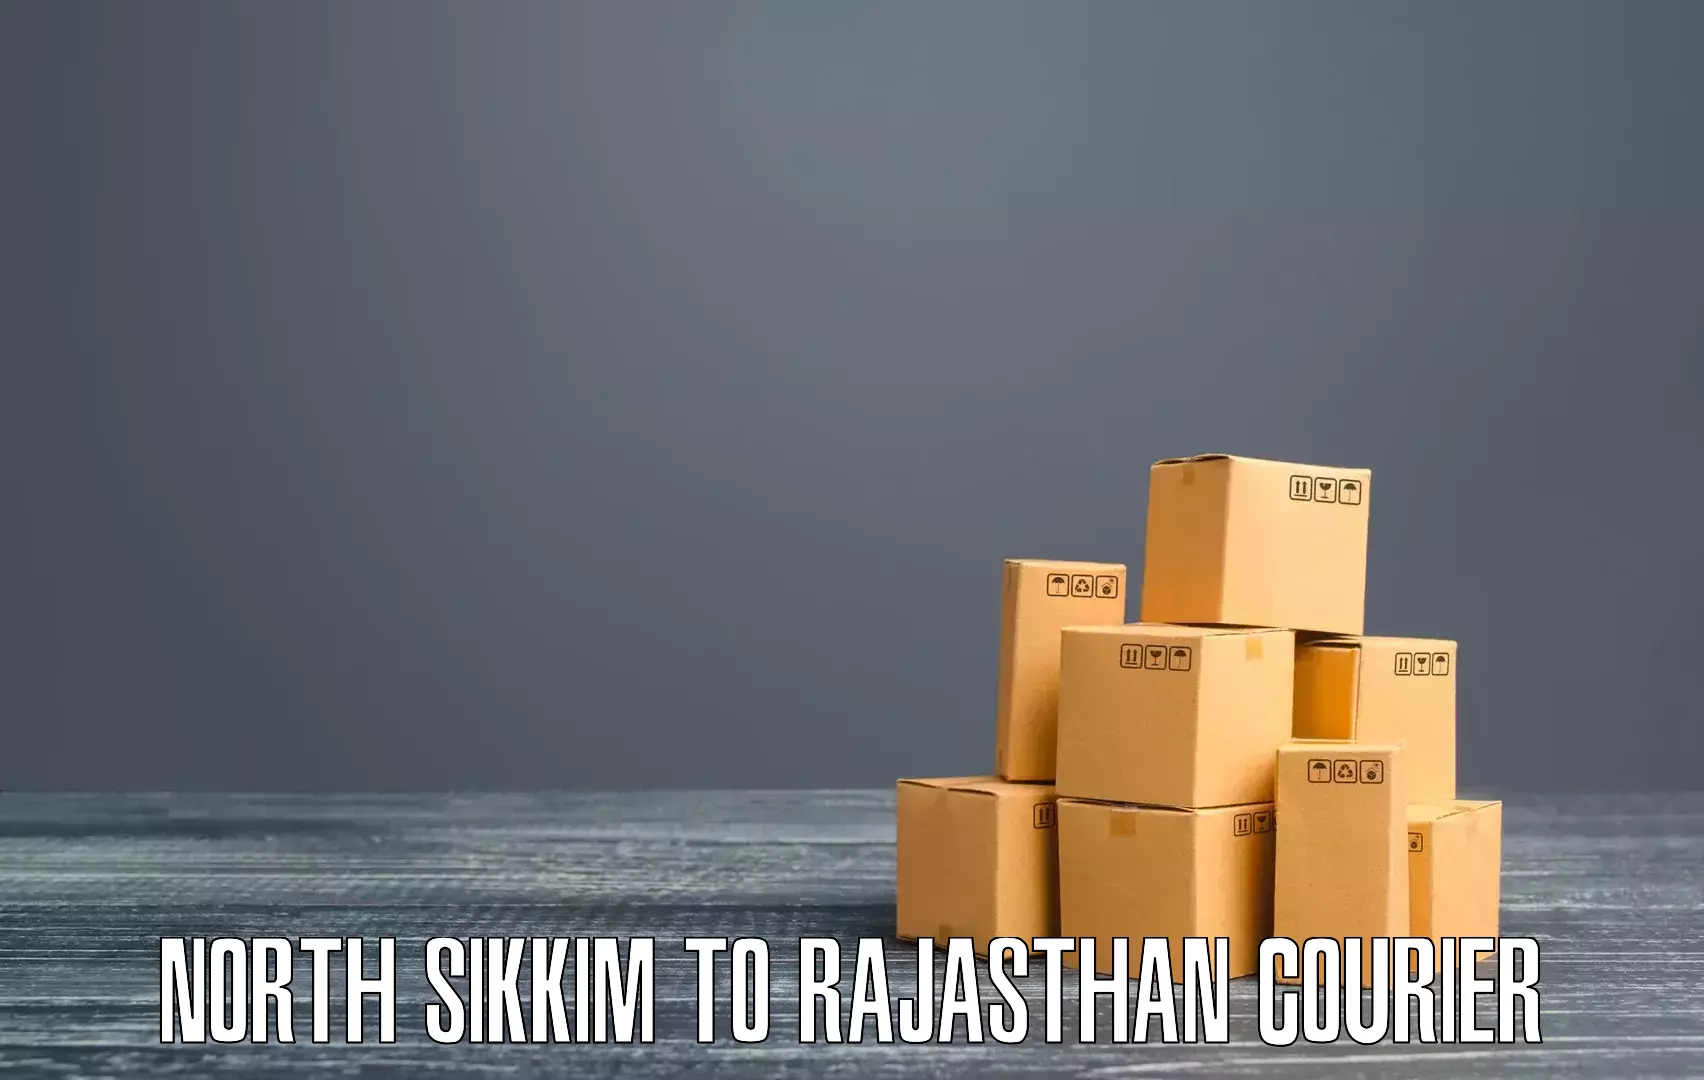 Efficient order fulfillment North Sikkim to Abu Road